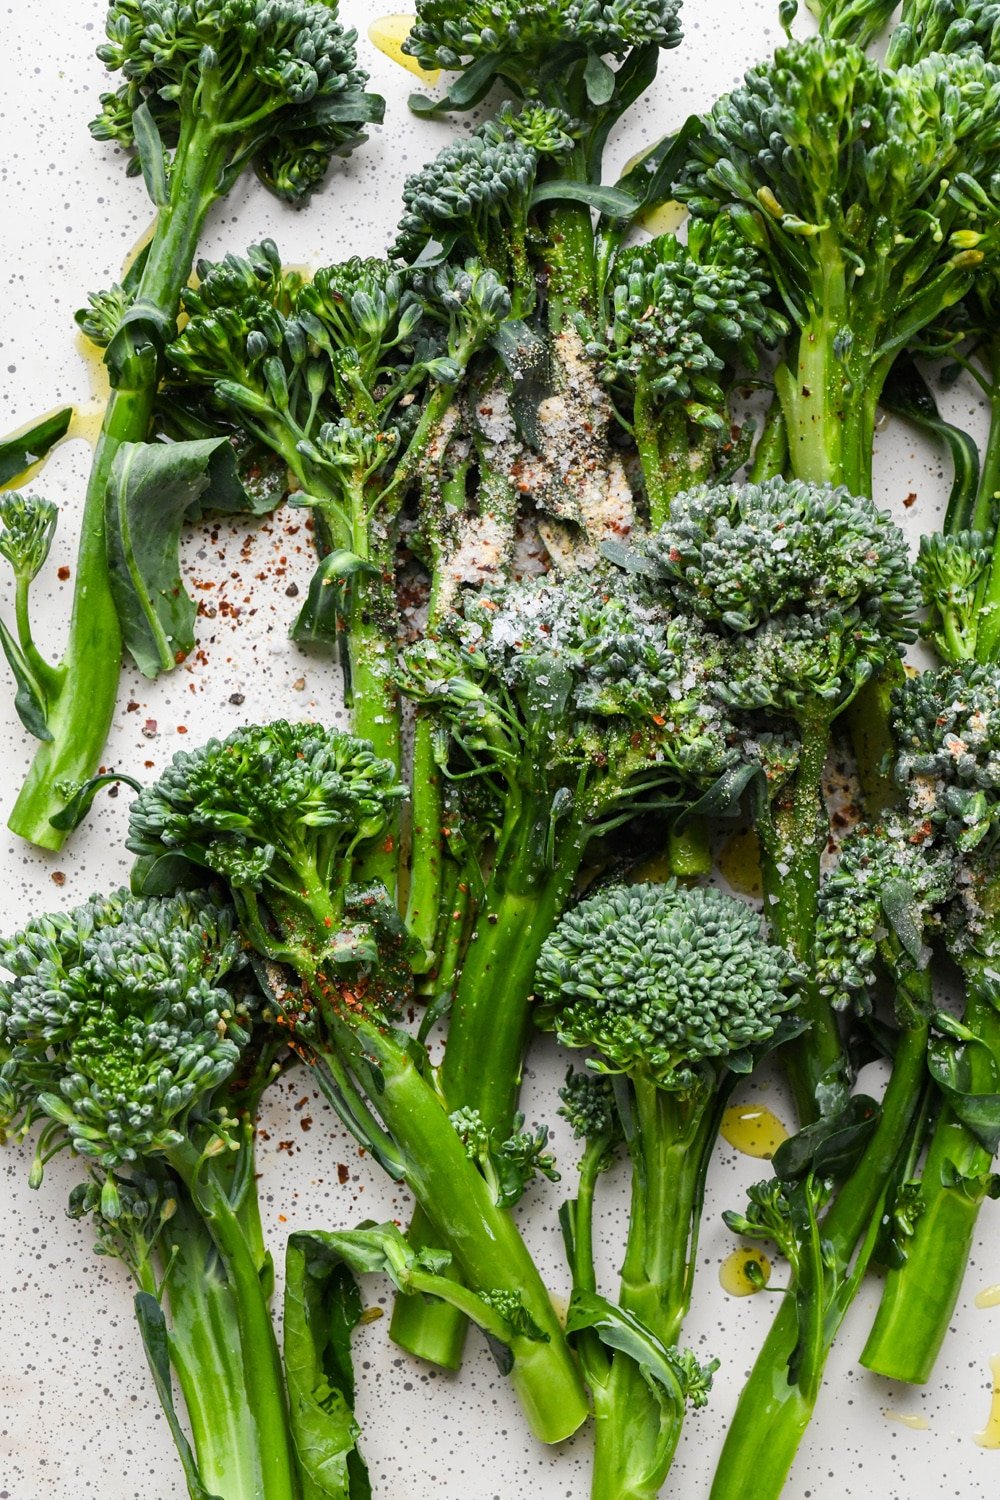 How to make roasted broccolini: Prepped stalks of broccolini on a sheet pan topped with olive oil and spices, before tossing to coat.